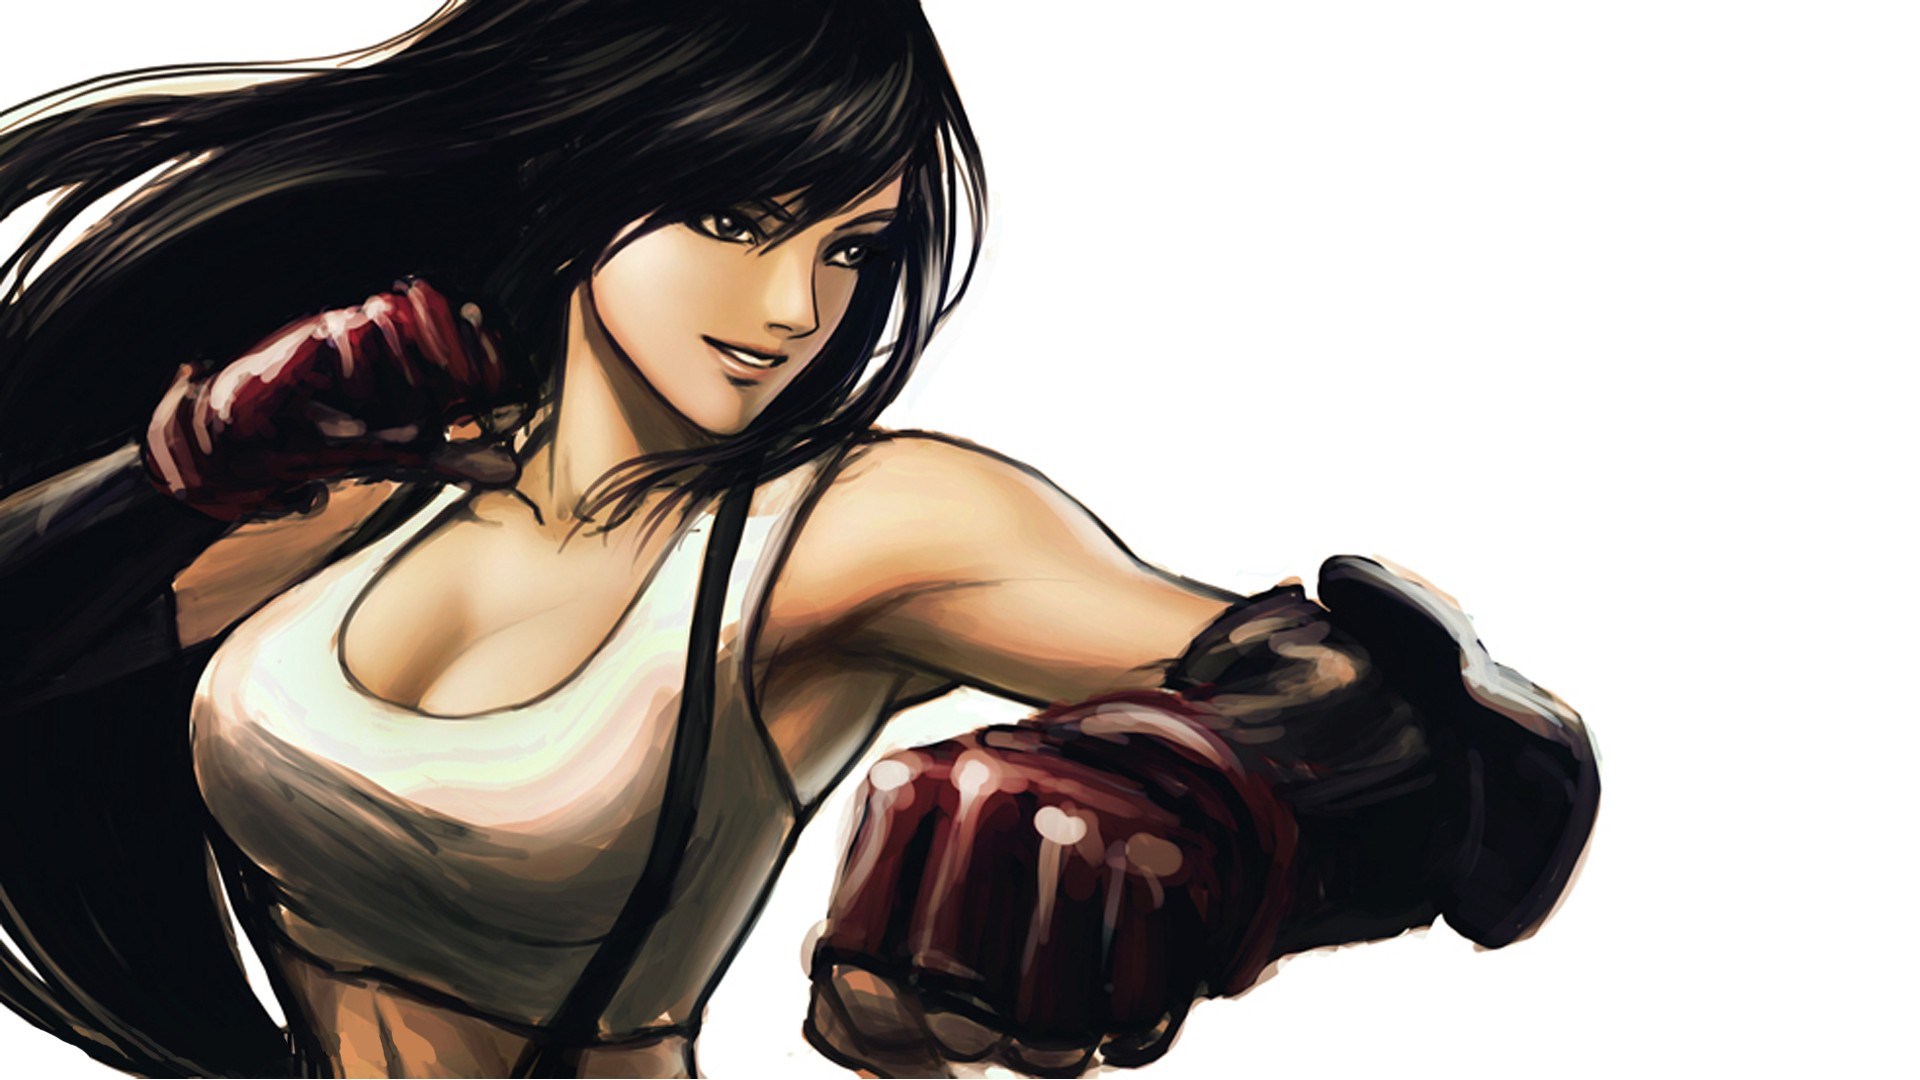 final fantasy tifa wallpaper which is under the fantasy wallpapers